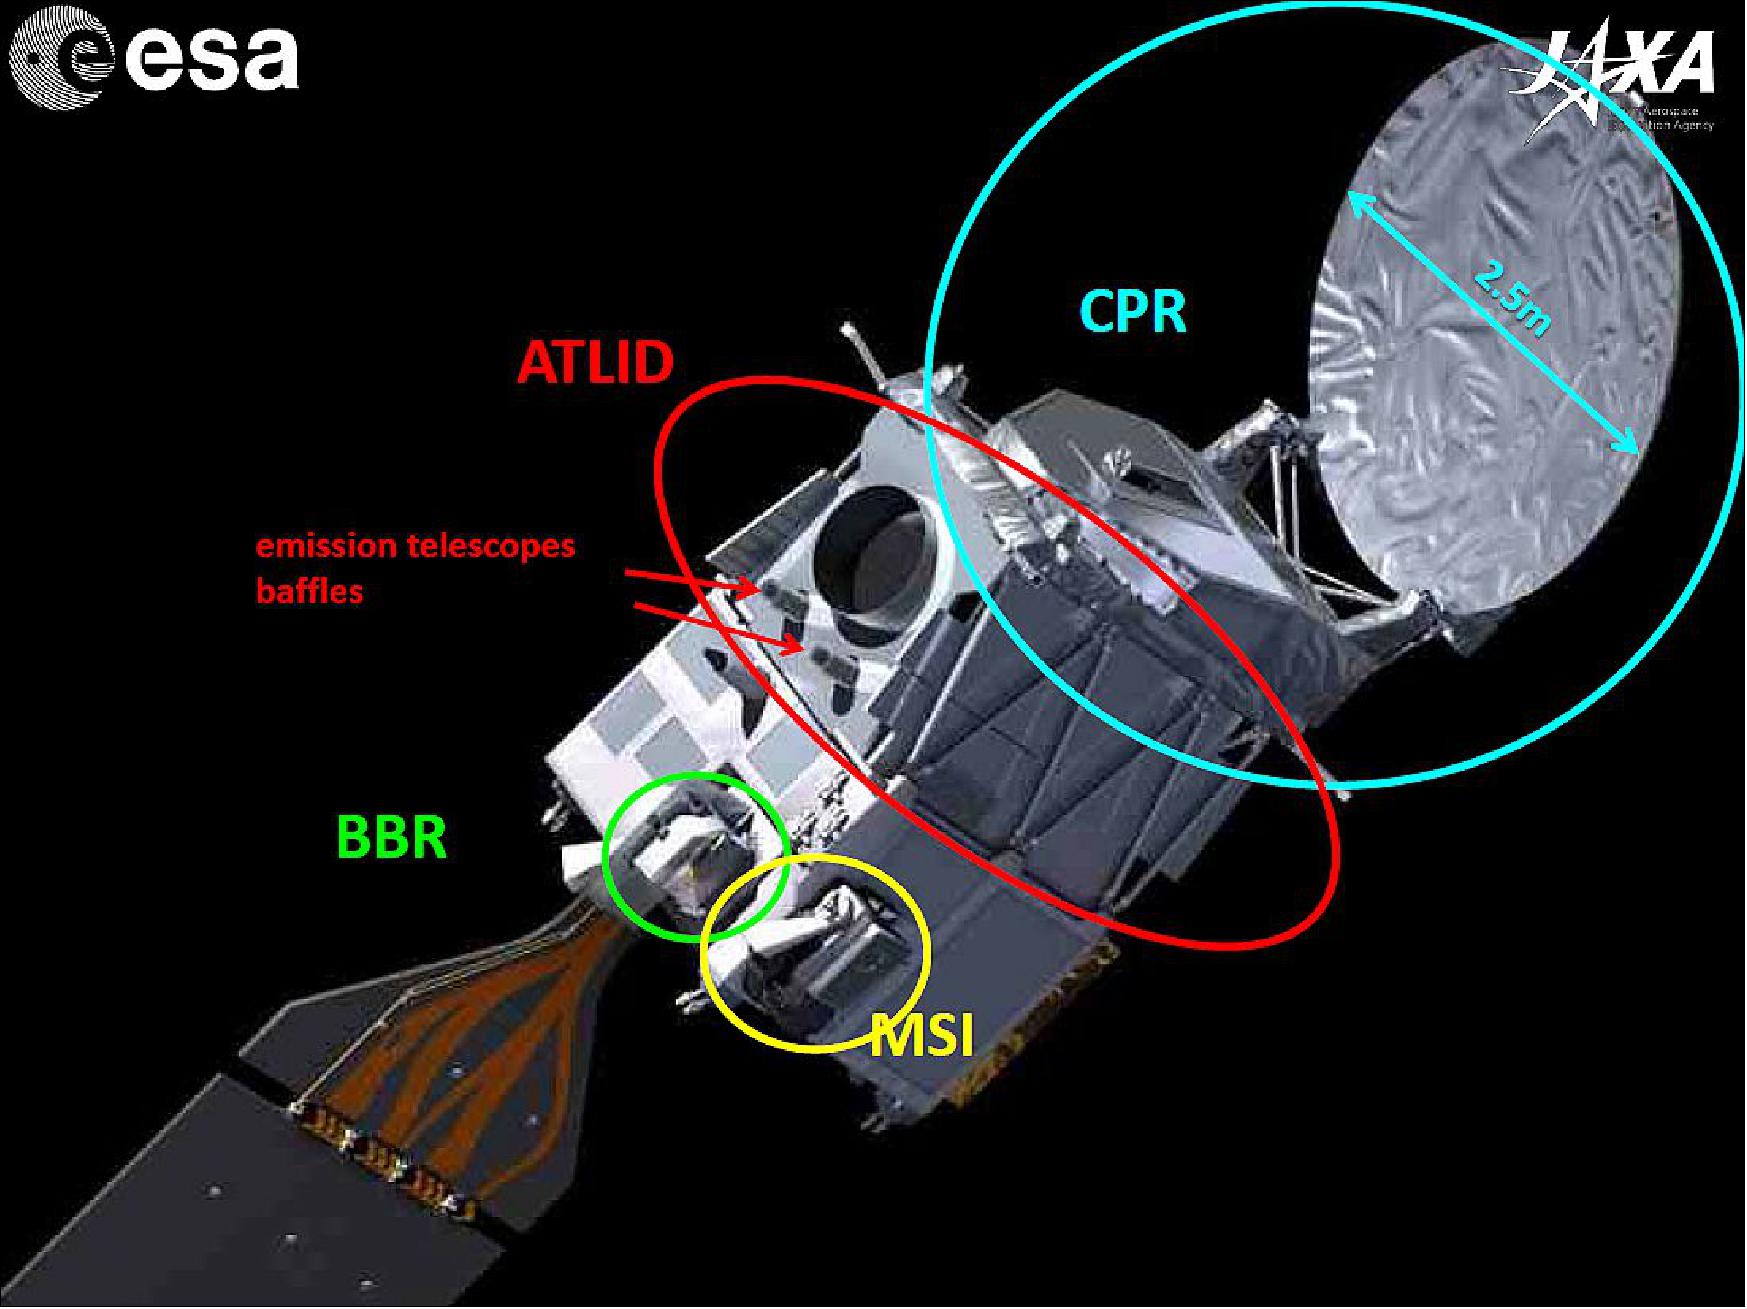 Illustration of the EarthCARE spacecraft and its sensor complement